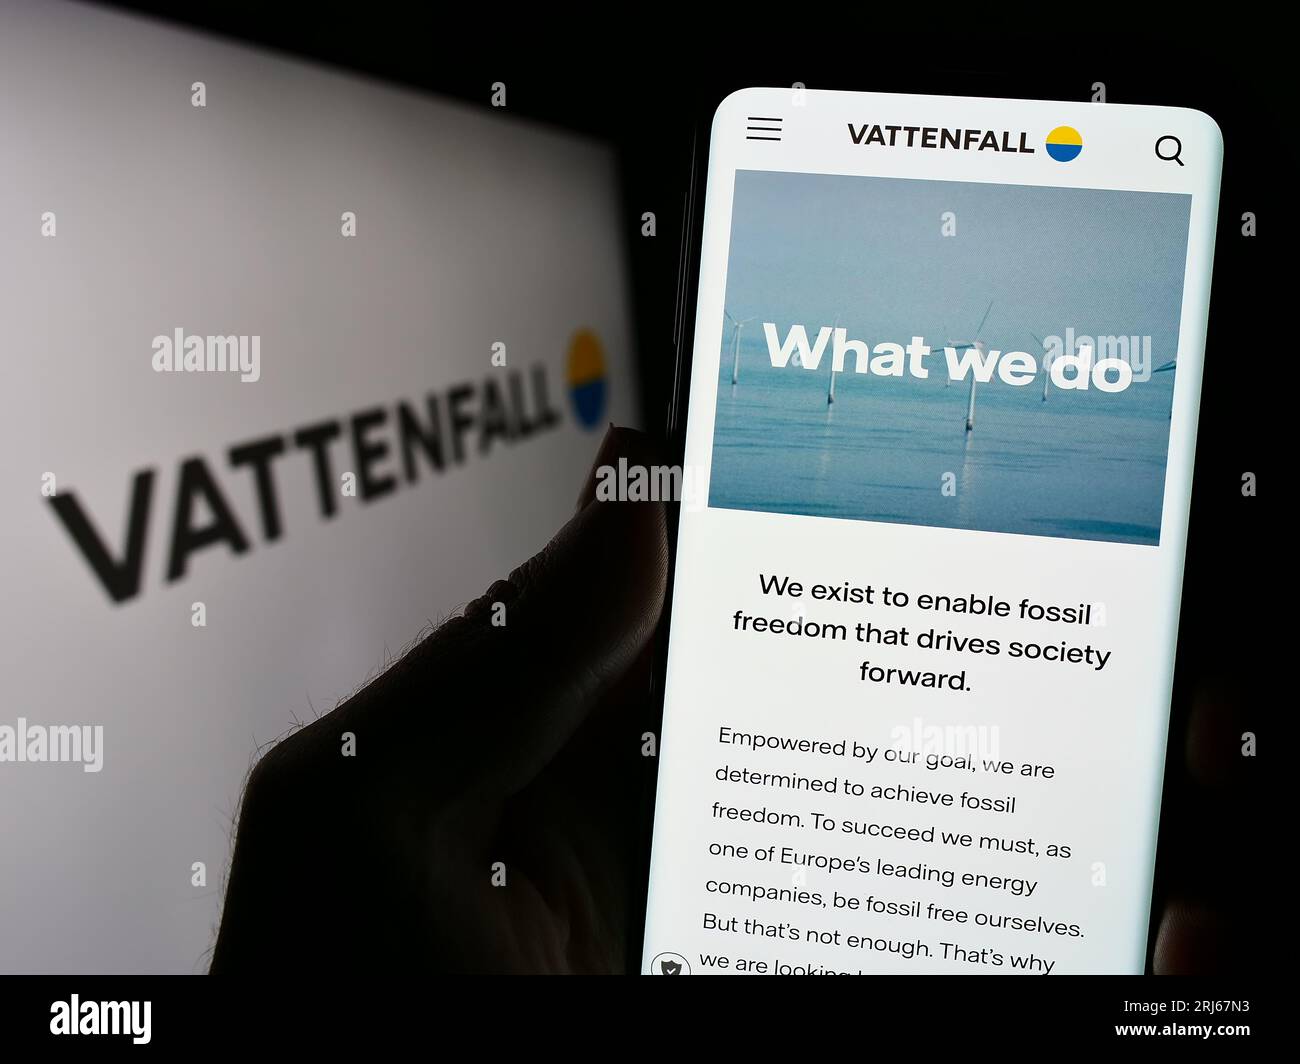 Person holding cellphone with webpage of Swedish energy company Vattenfall AB on screen in front of logo. Focus on center of phone display. Stock Photo